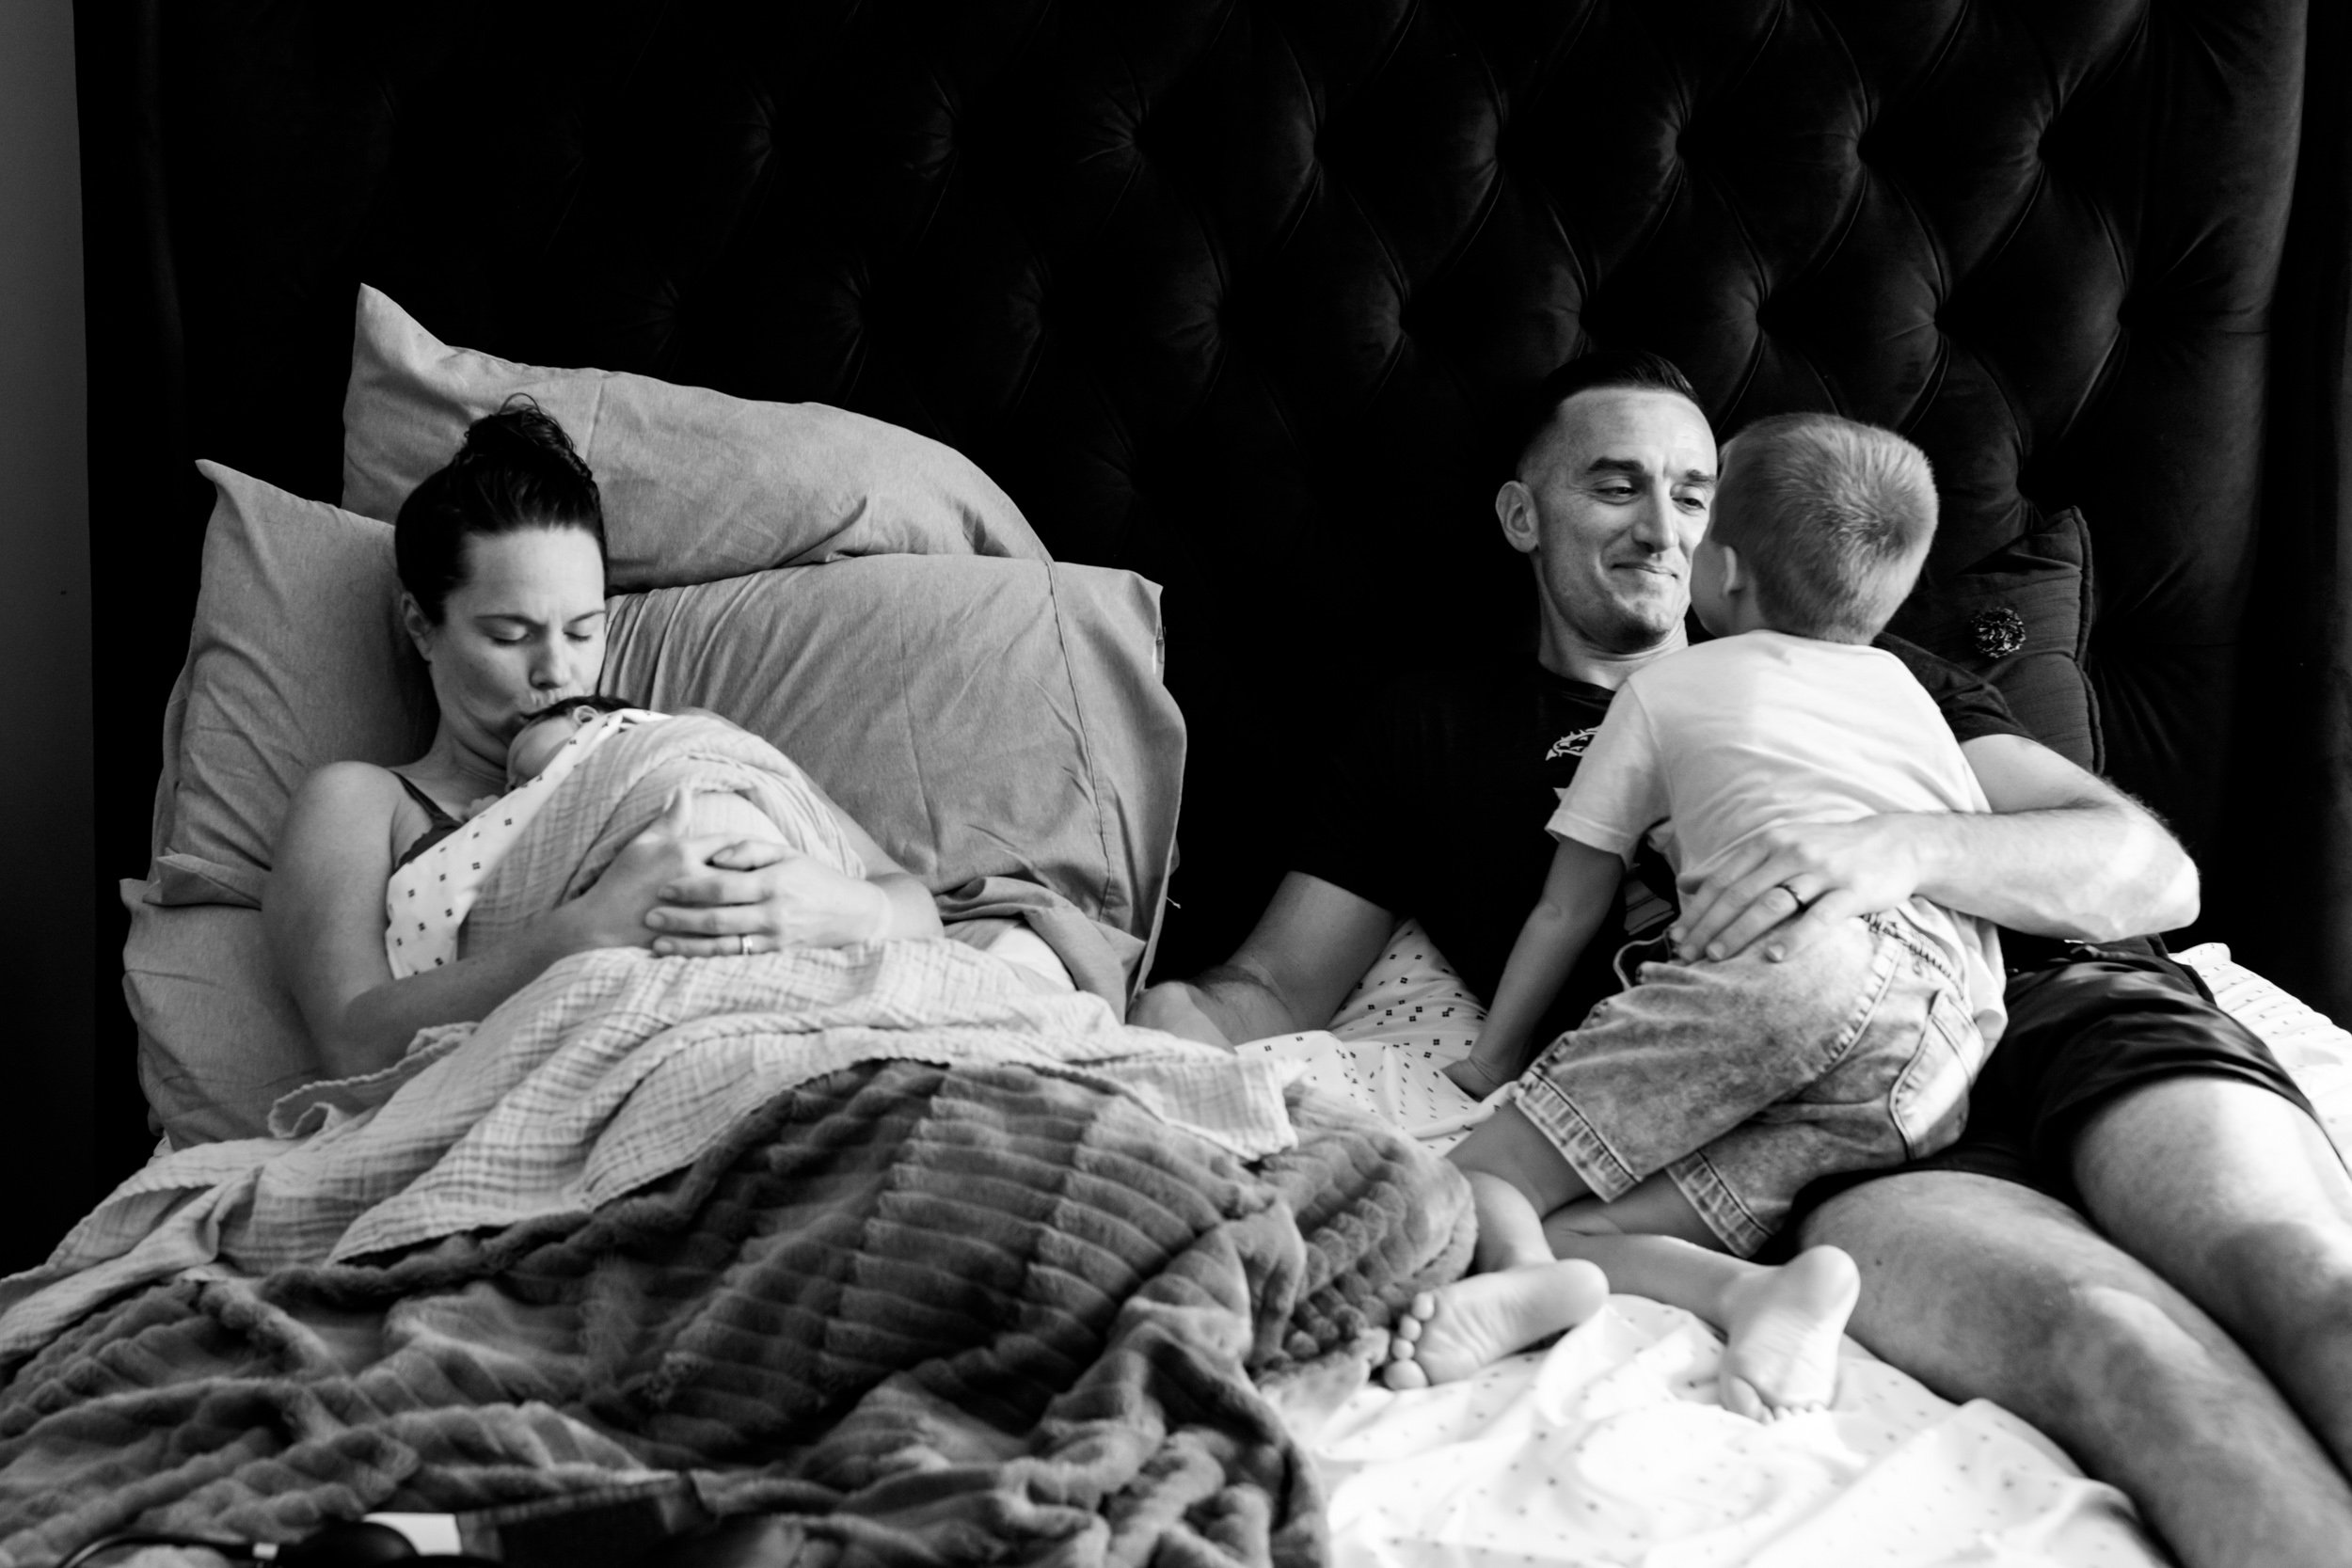 dad smiling at little boy while mom smiles at the newborn baby girl